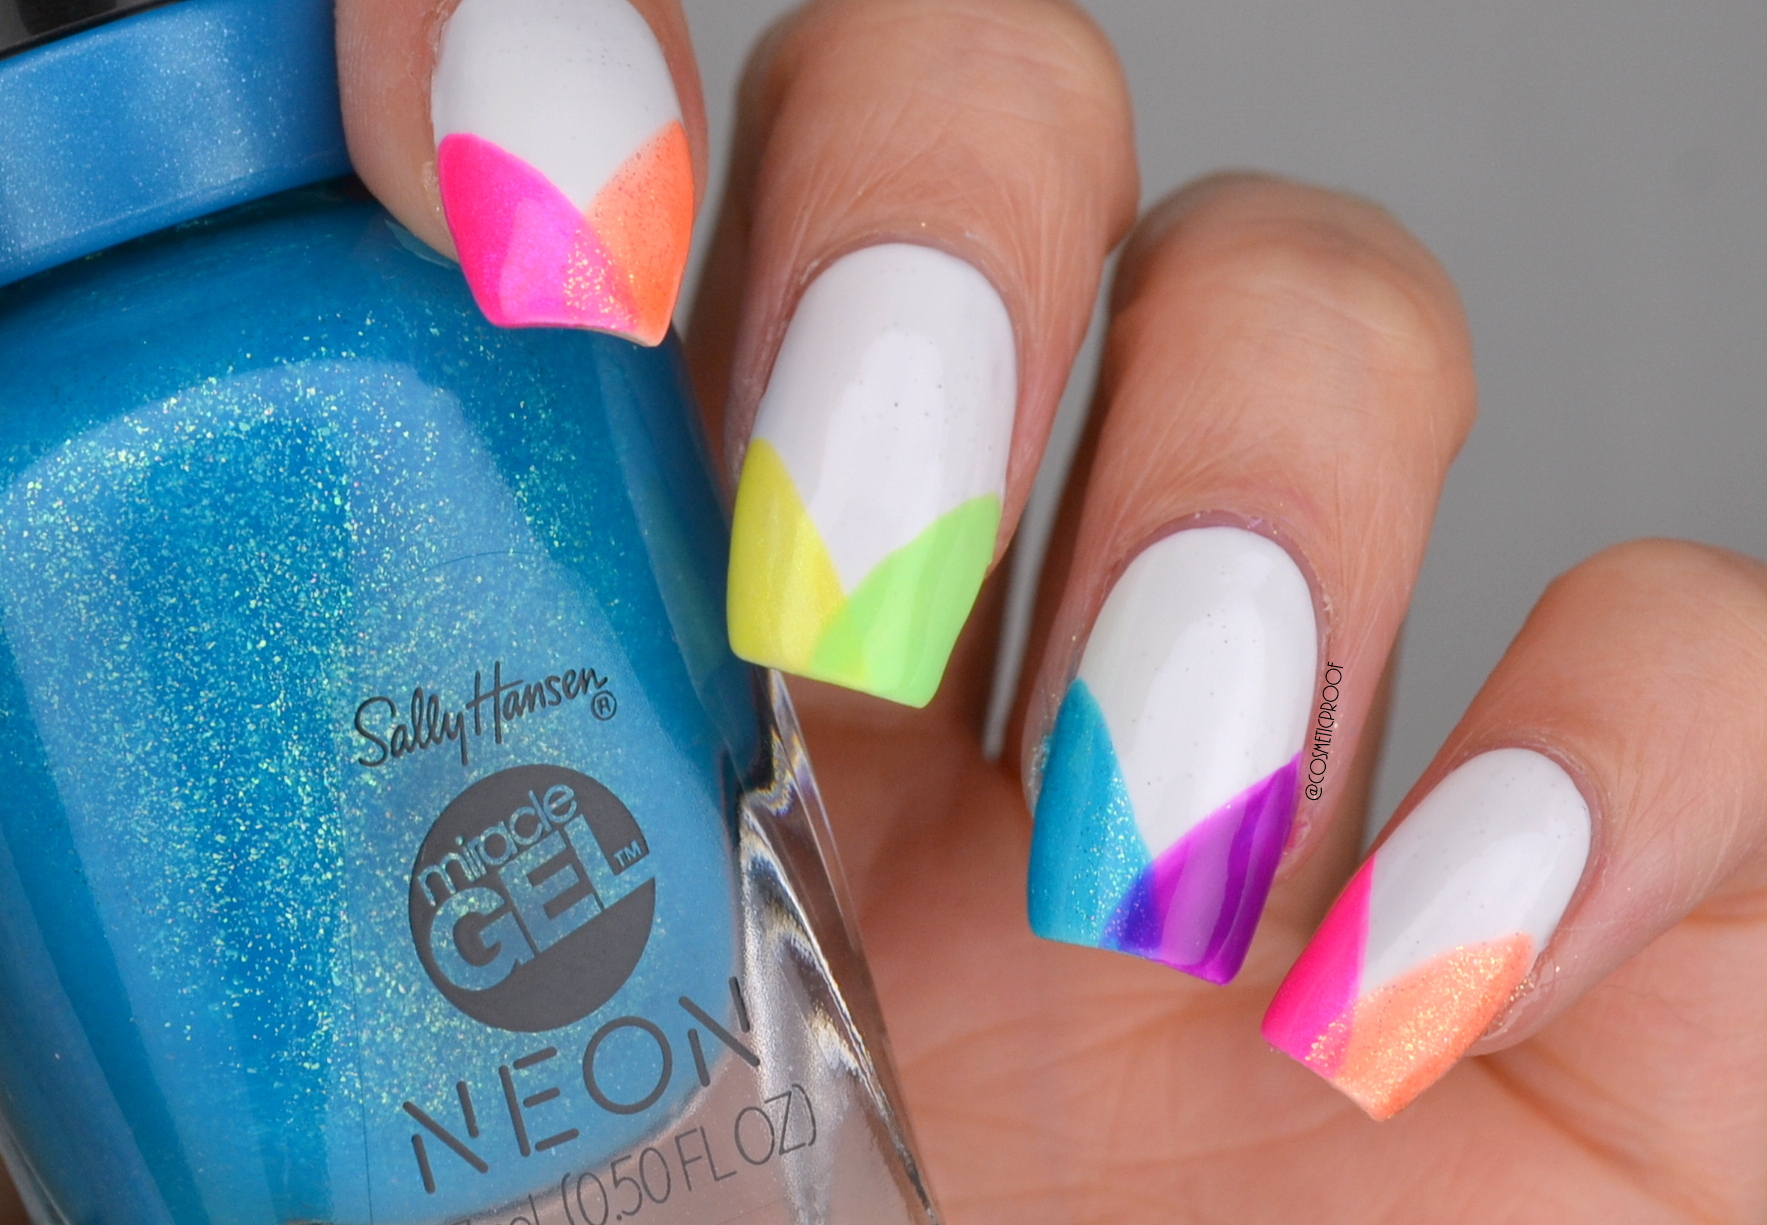 Neon Striped Nail Art Designs for Every Occasion - wide 3